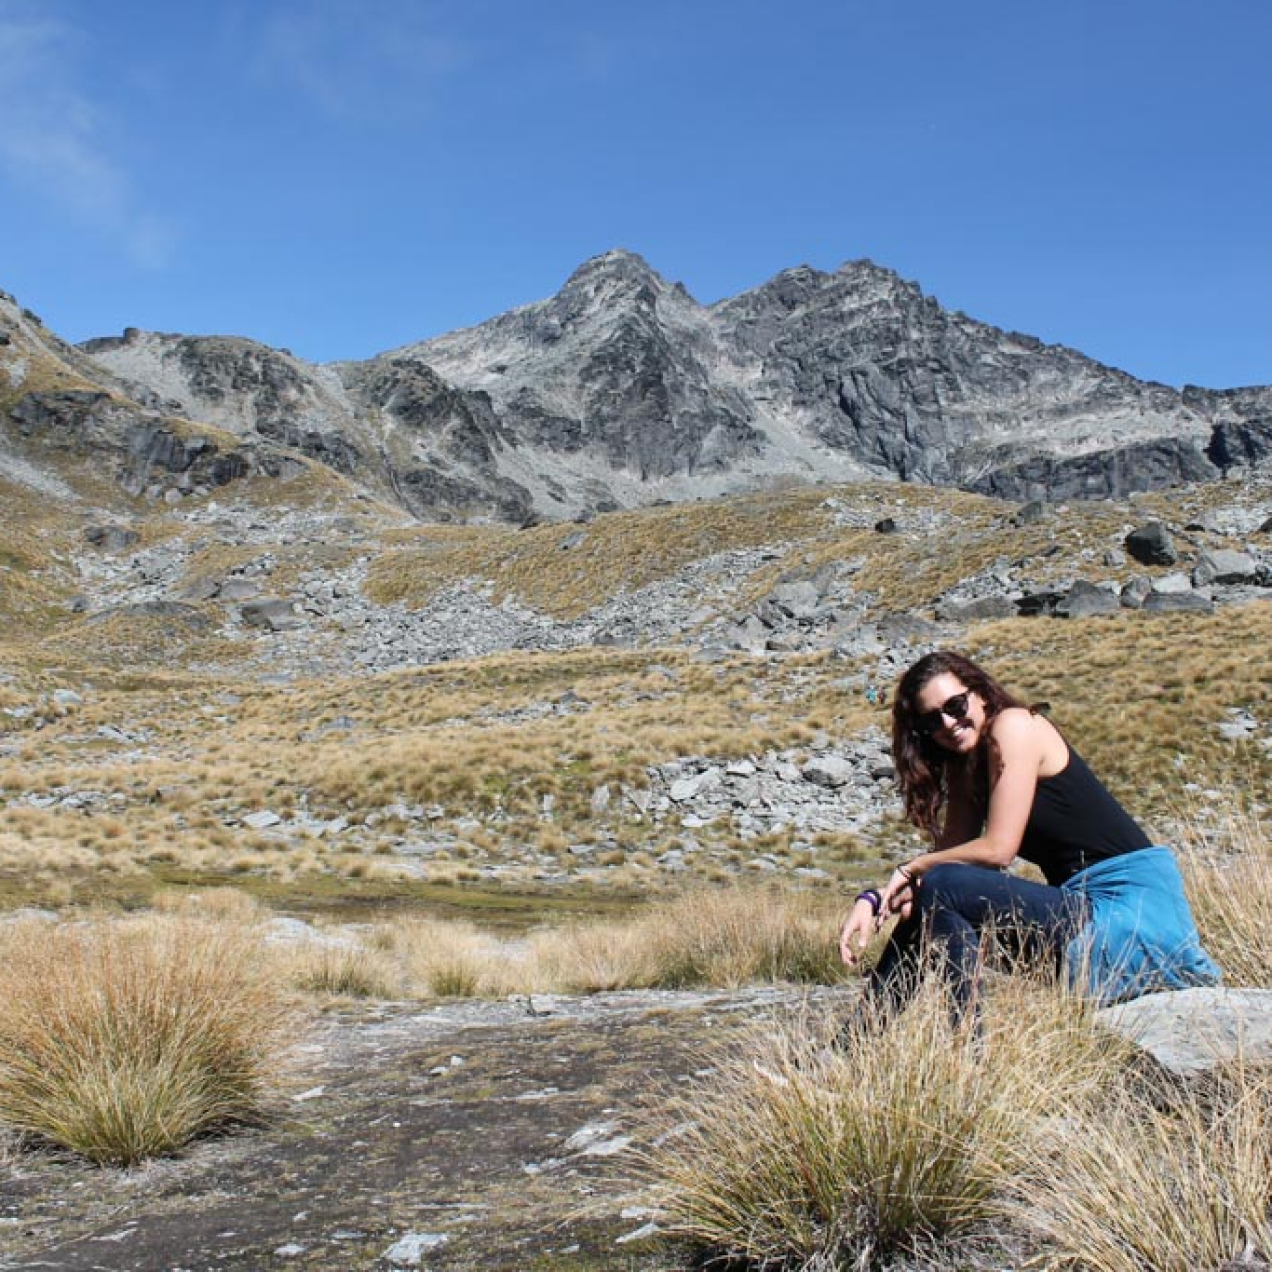 10 QUESTIONS with TBG FEATURED MEMBER Rania of Bachelor of Travel